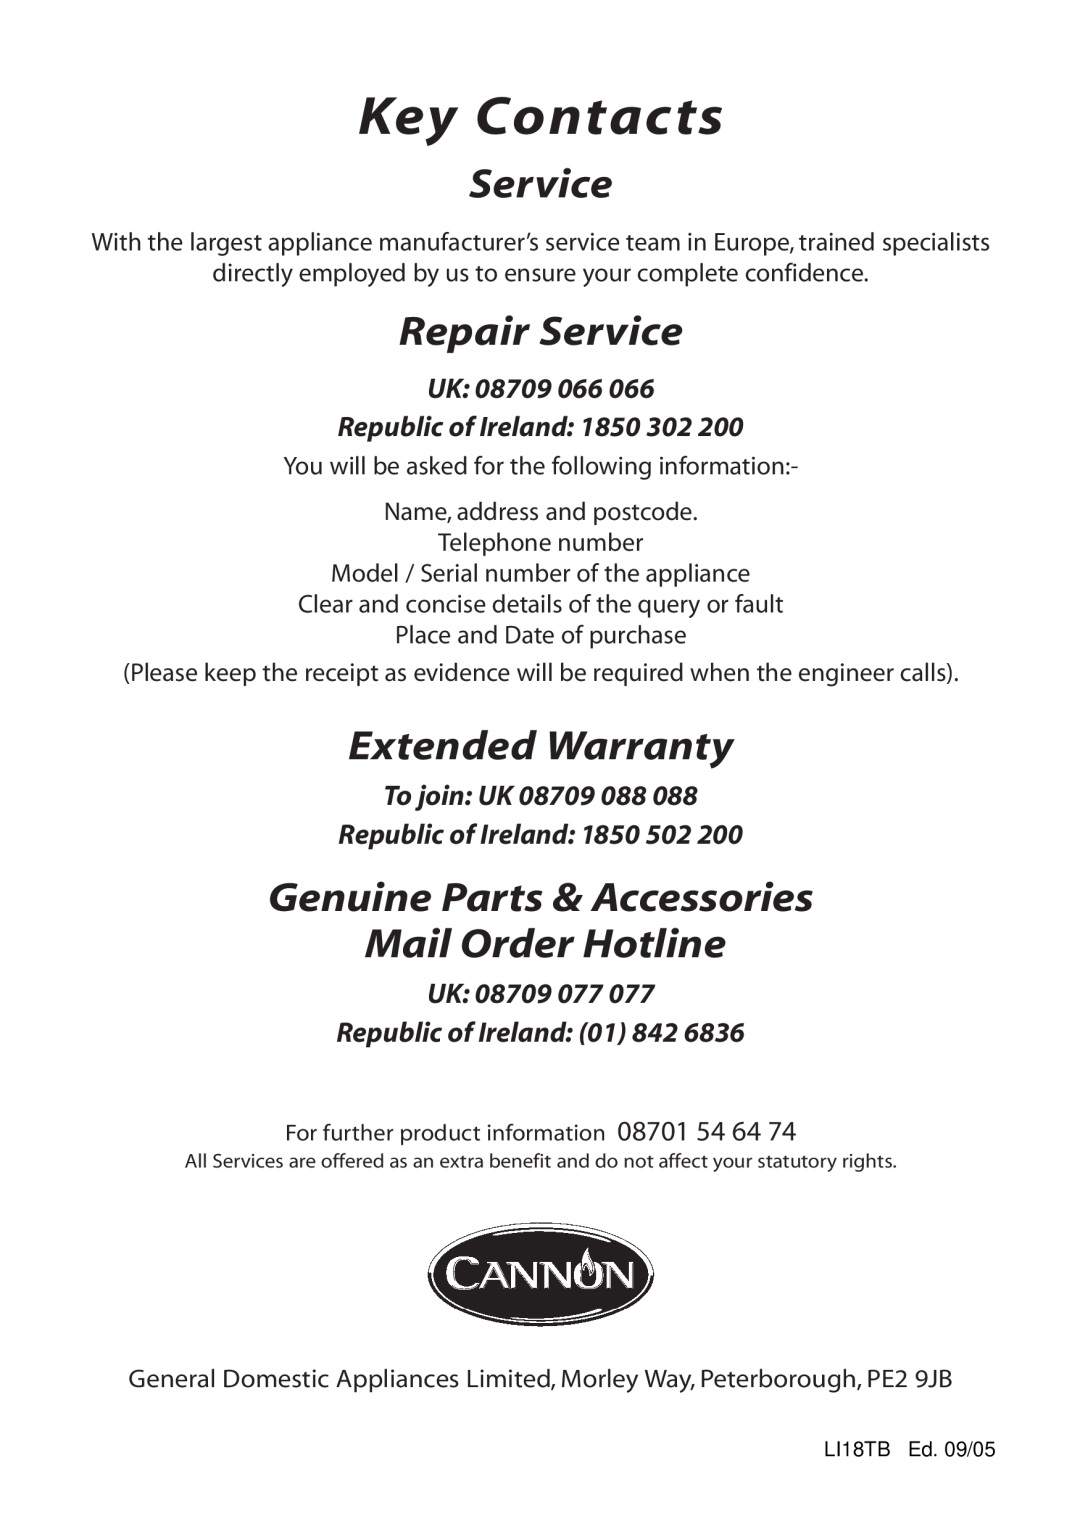 Cannon BHC60K manual Key Contacts, Repair Service, Extended Warranty, Genuine Parts & Accessories Mail Order Hotline 